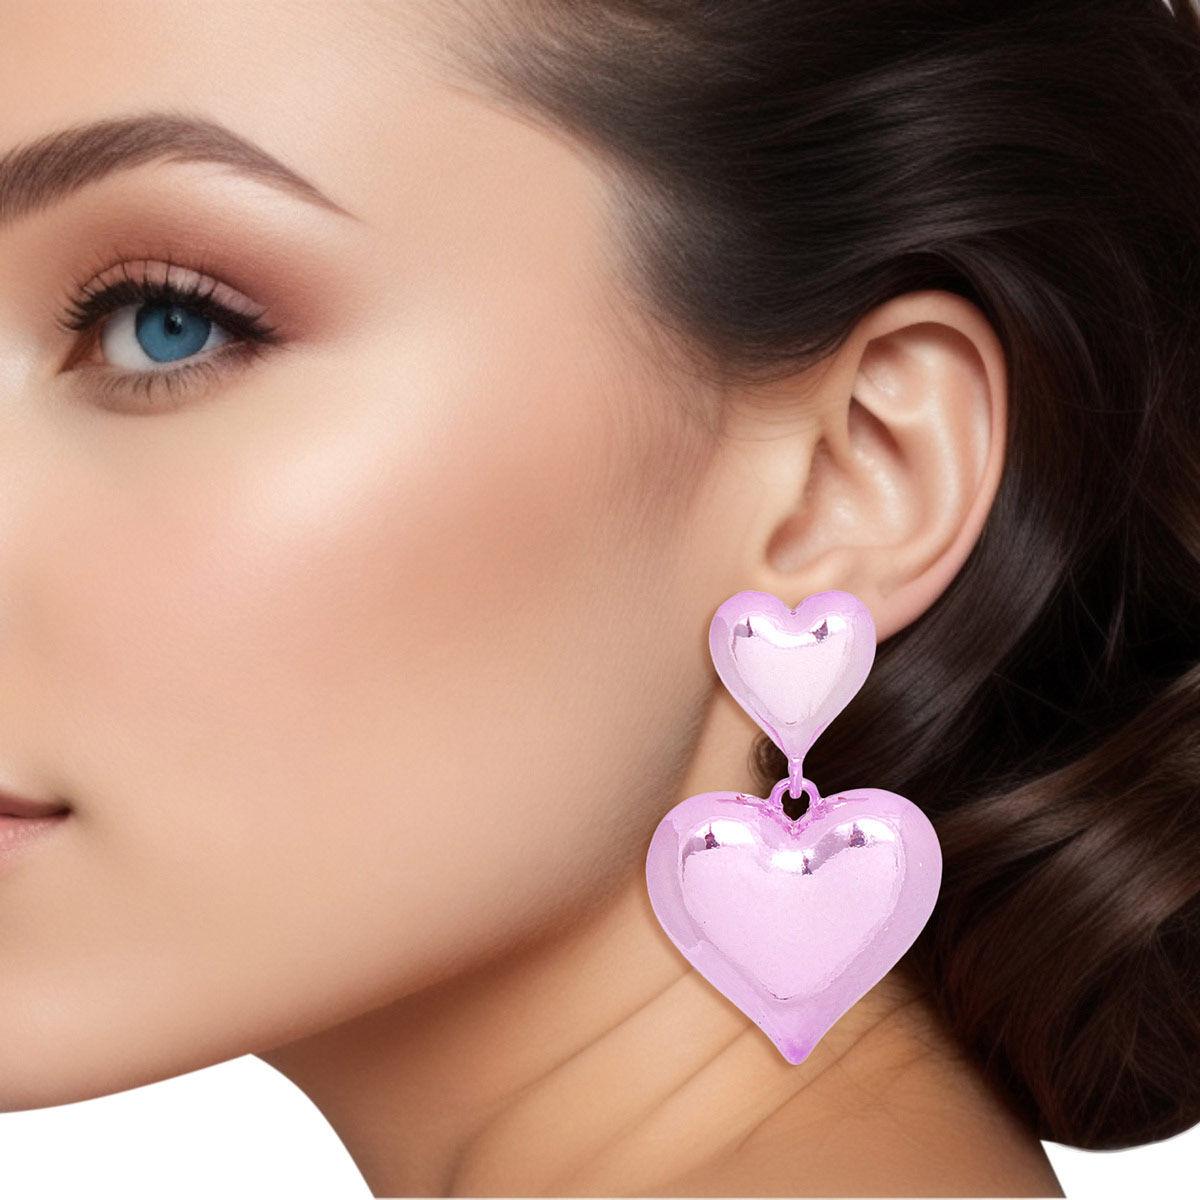 Pink Dangle Heart Earrings: A Must-Have for Romantic Ensembles